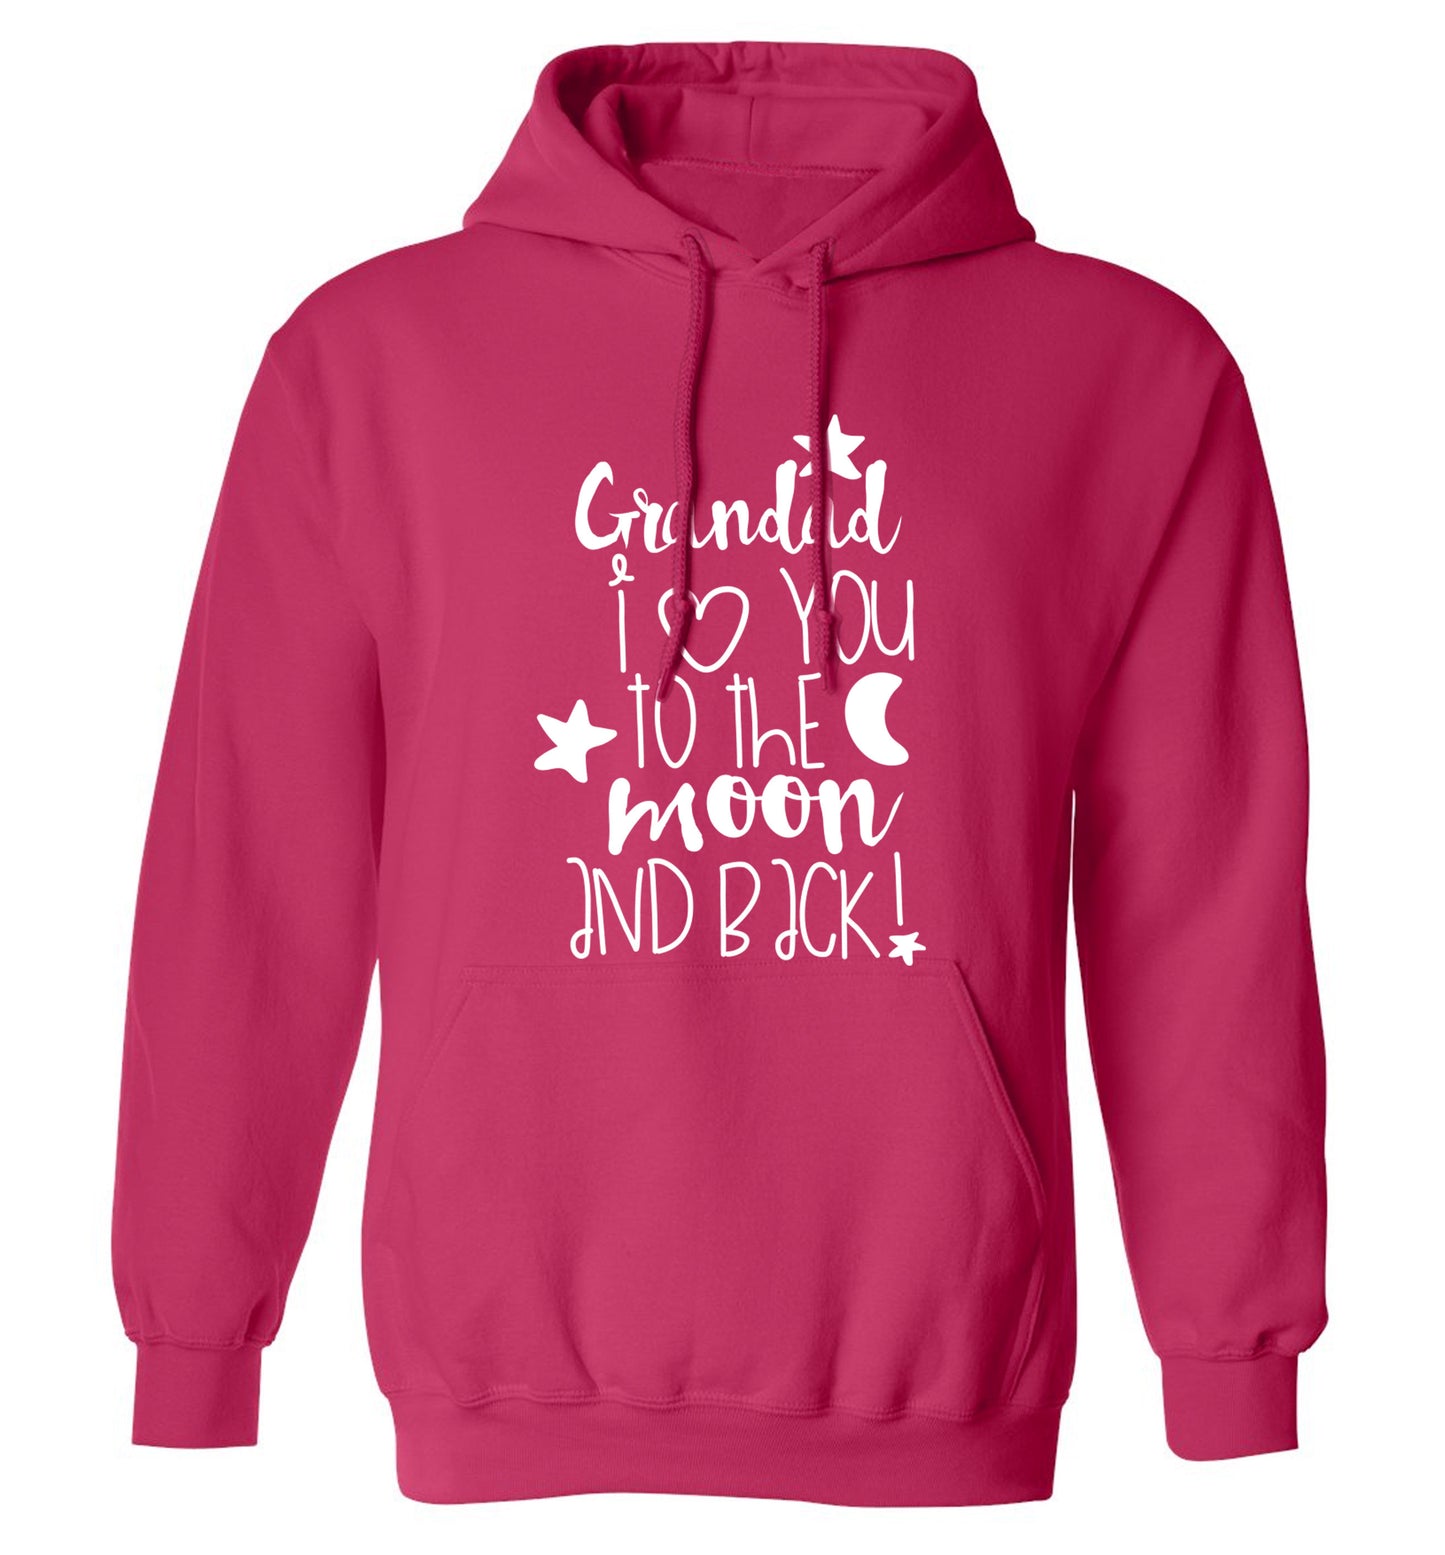 Grandad's I love you to the moon and back adults unisex pink hoodie 2XL